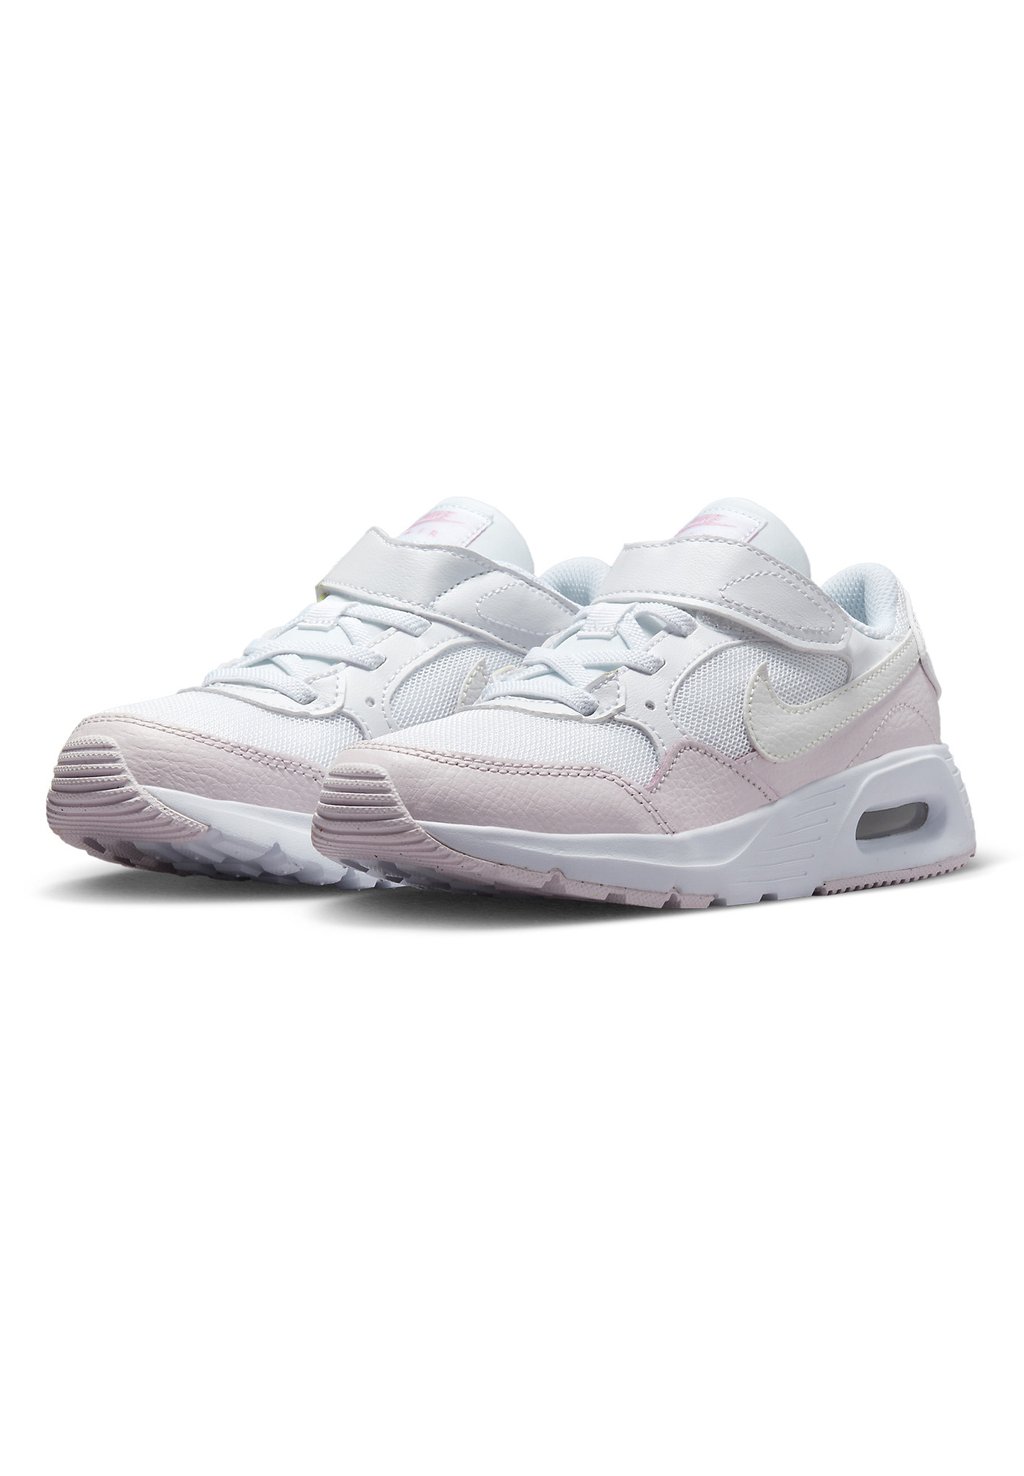 Кроссовки низкие AIR MAX UNISEX Nike Sportswear, цвет white/summit white-pearl pink med soft pink freshwater pearl white button pearl aaa pink purple white button pearl